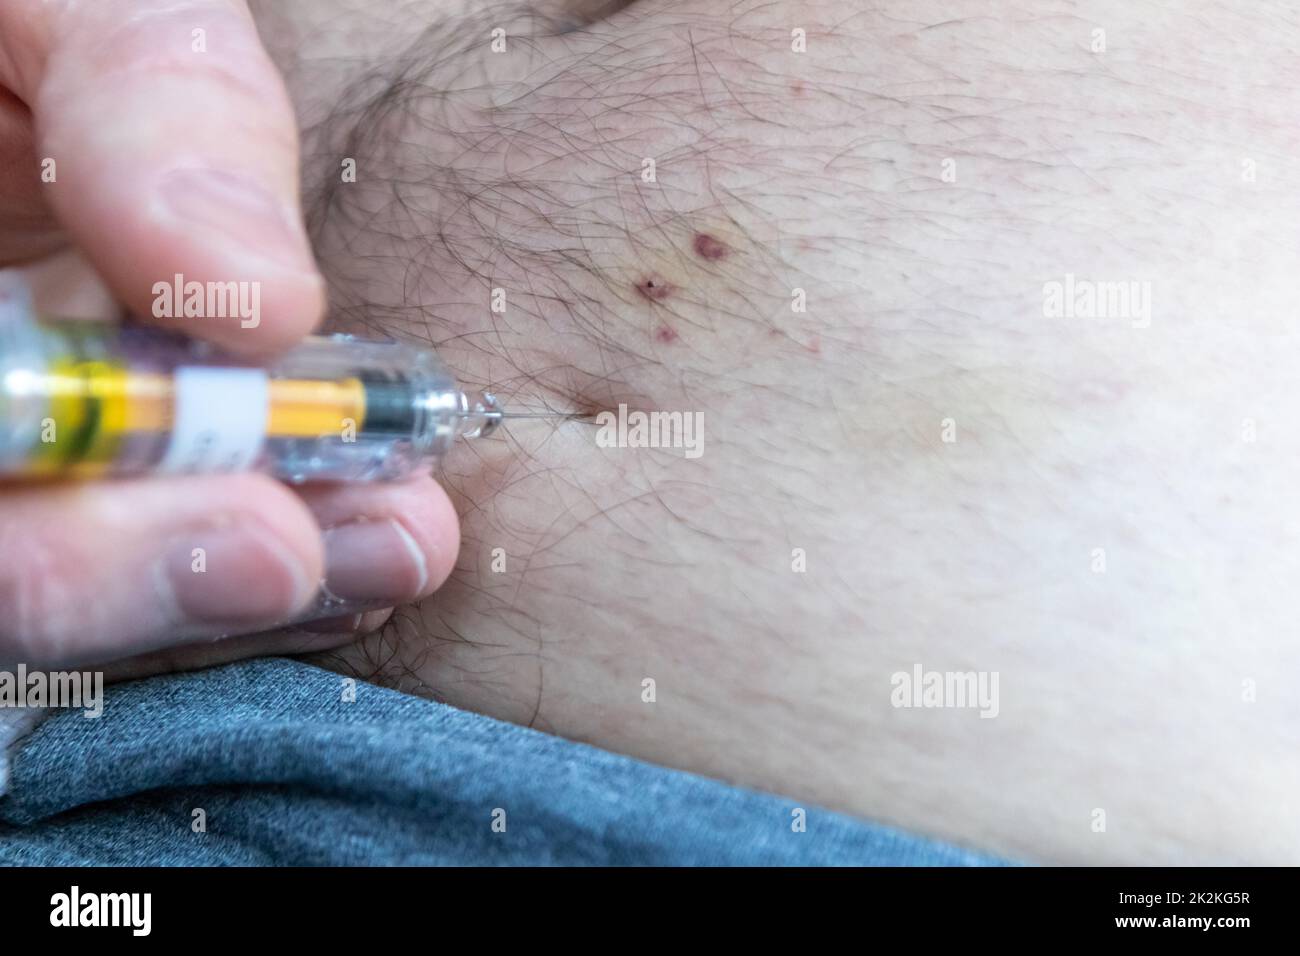 European man with Achilles tendon rupture after rupture operation self-injects enoxaparin or dalteparin in his belly subcutaneously with prefabricated syringe to avoid thrombosis myocardial infarction Stock Photo